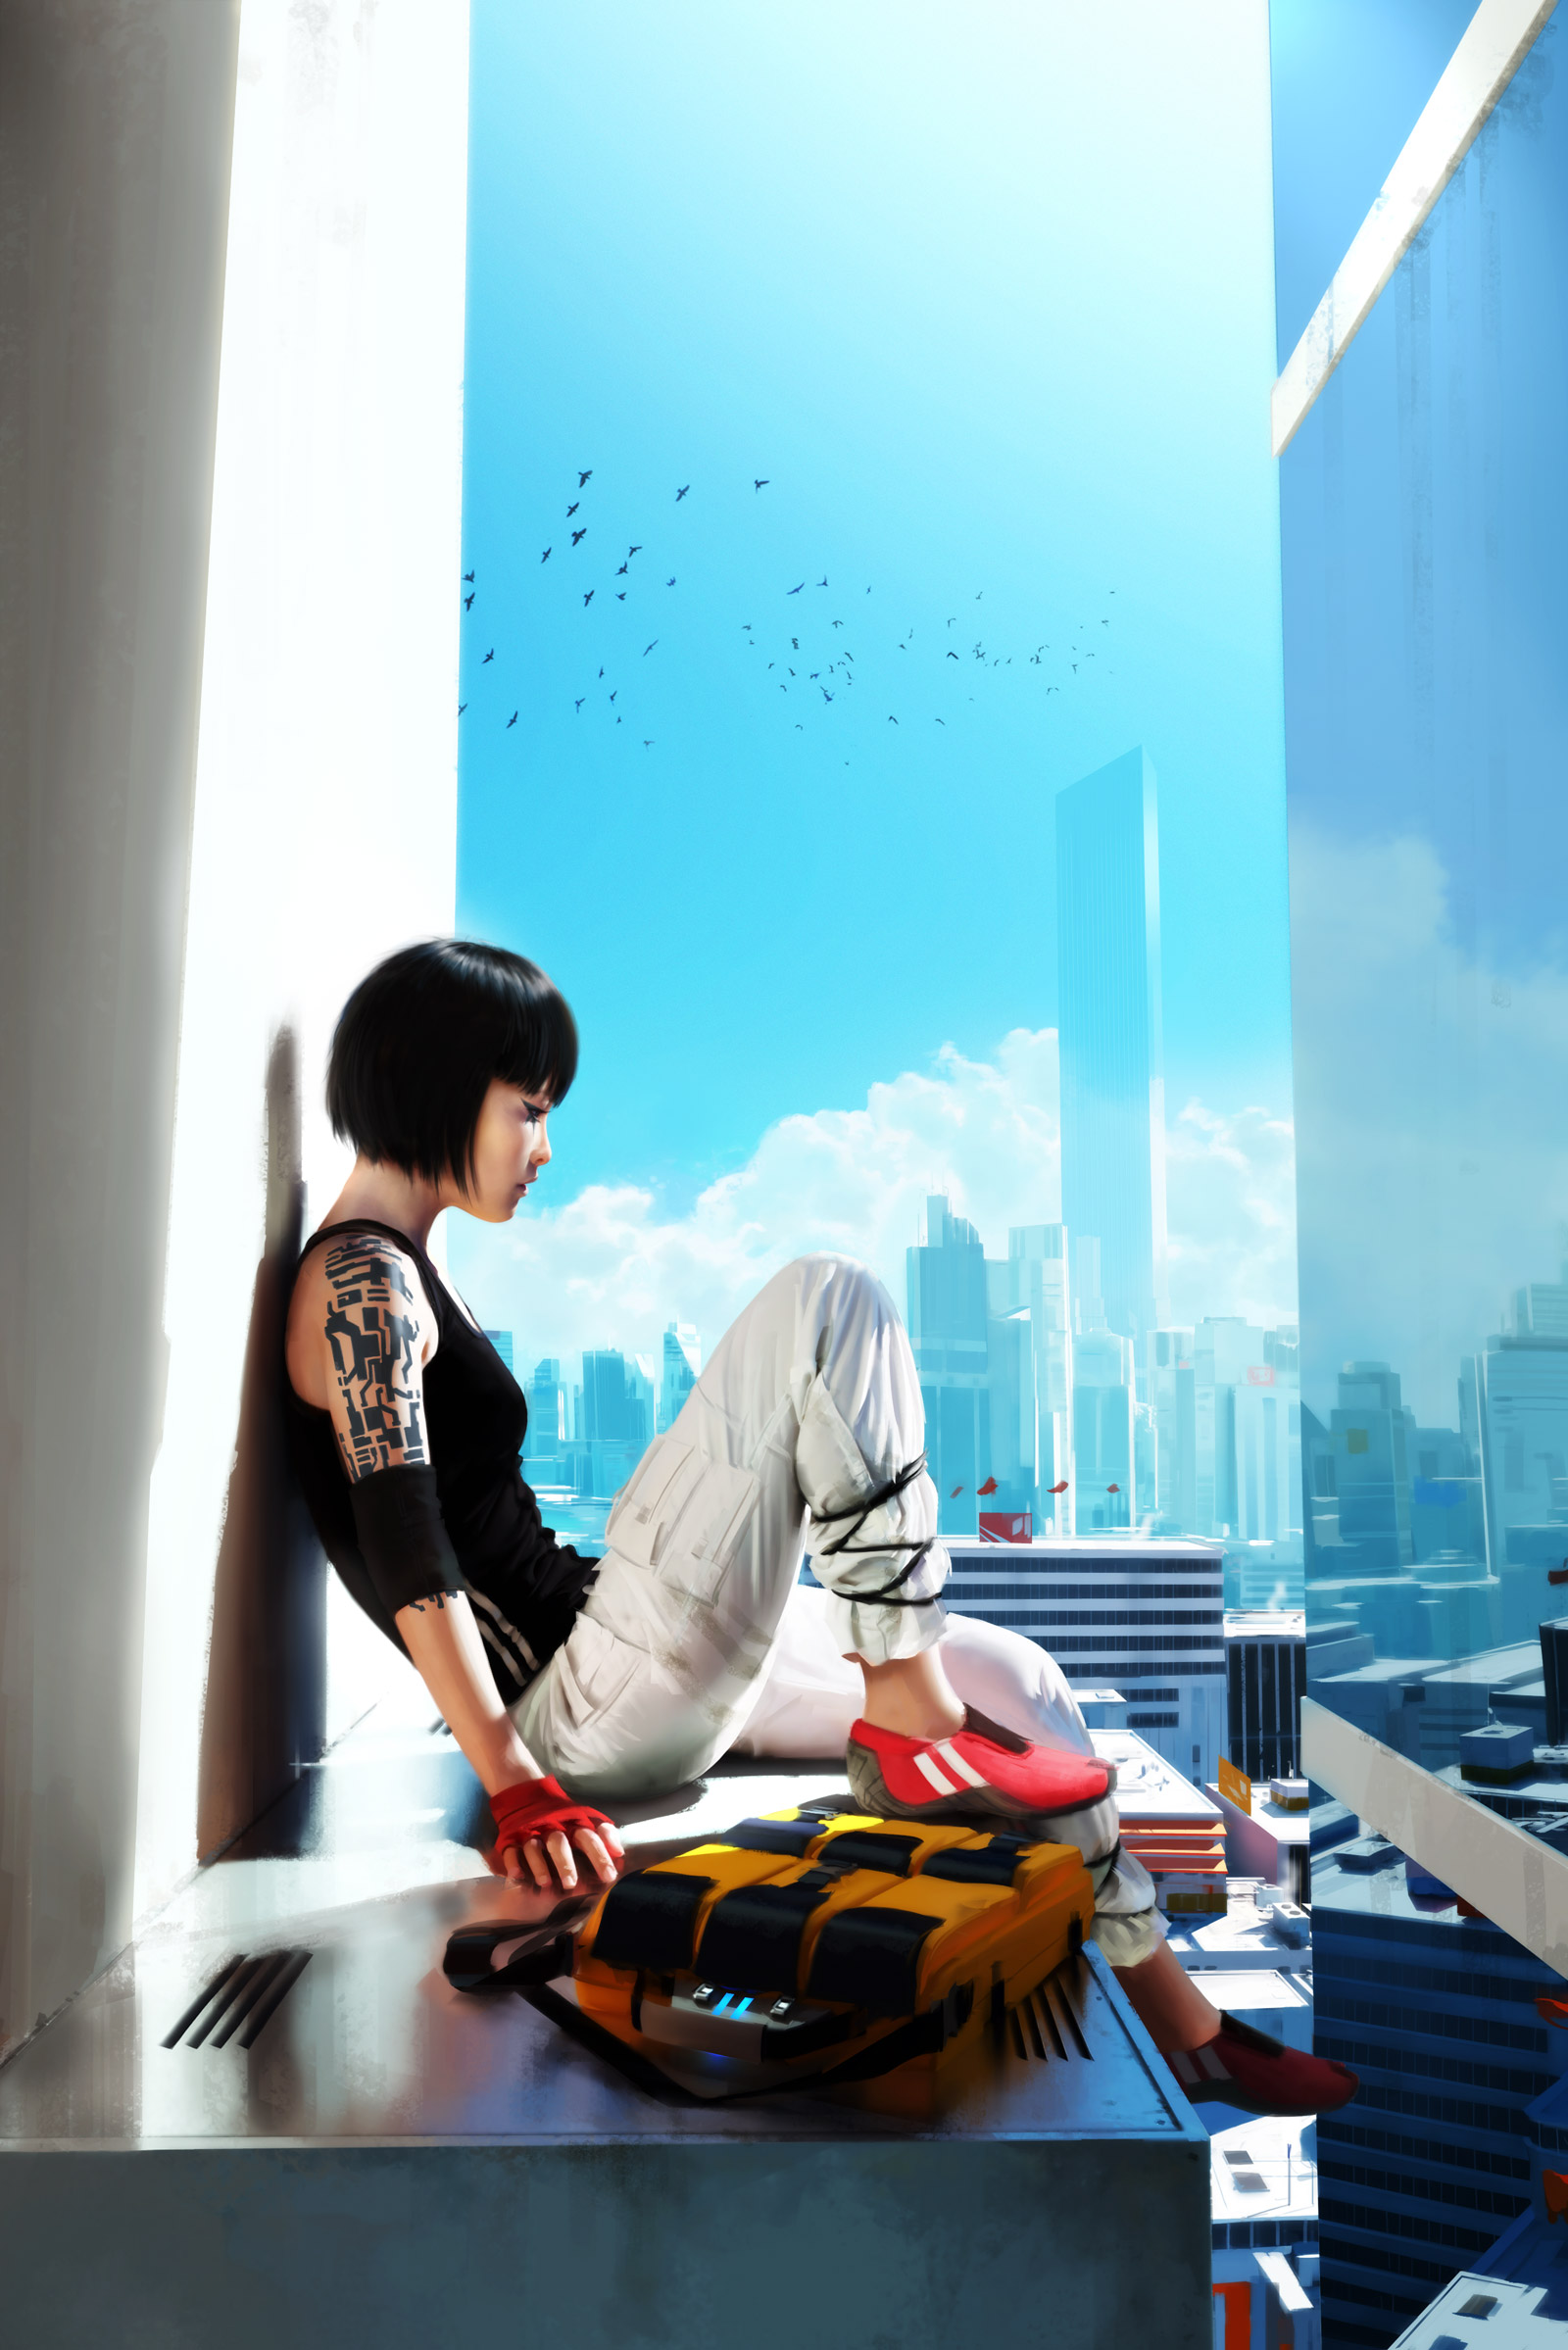 Mirror's Edge Gameplay - Chapter 9 - The Shard (Part 1) 